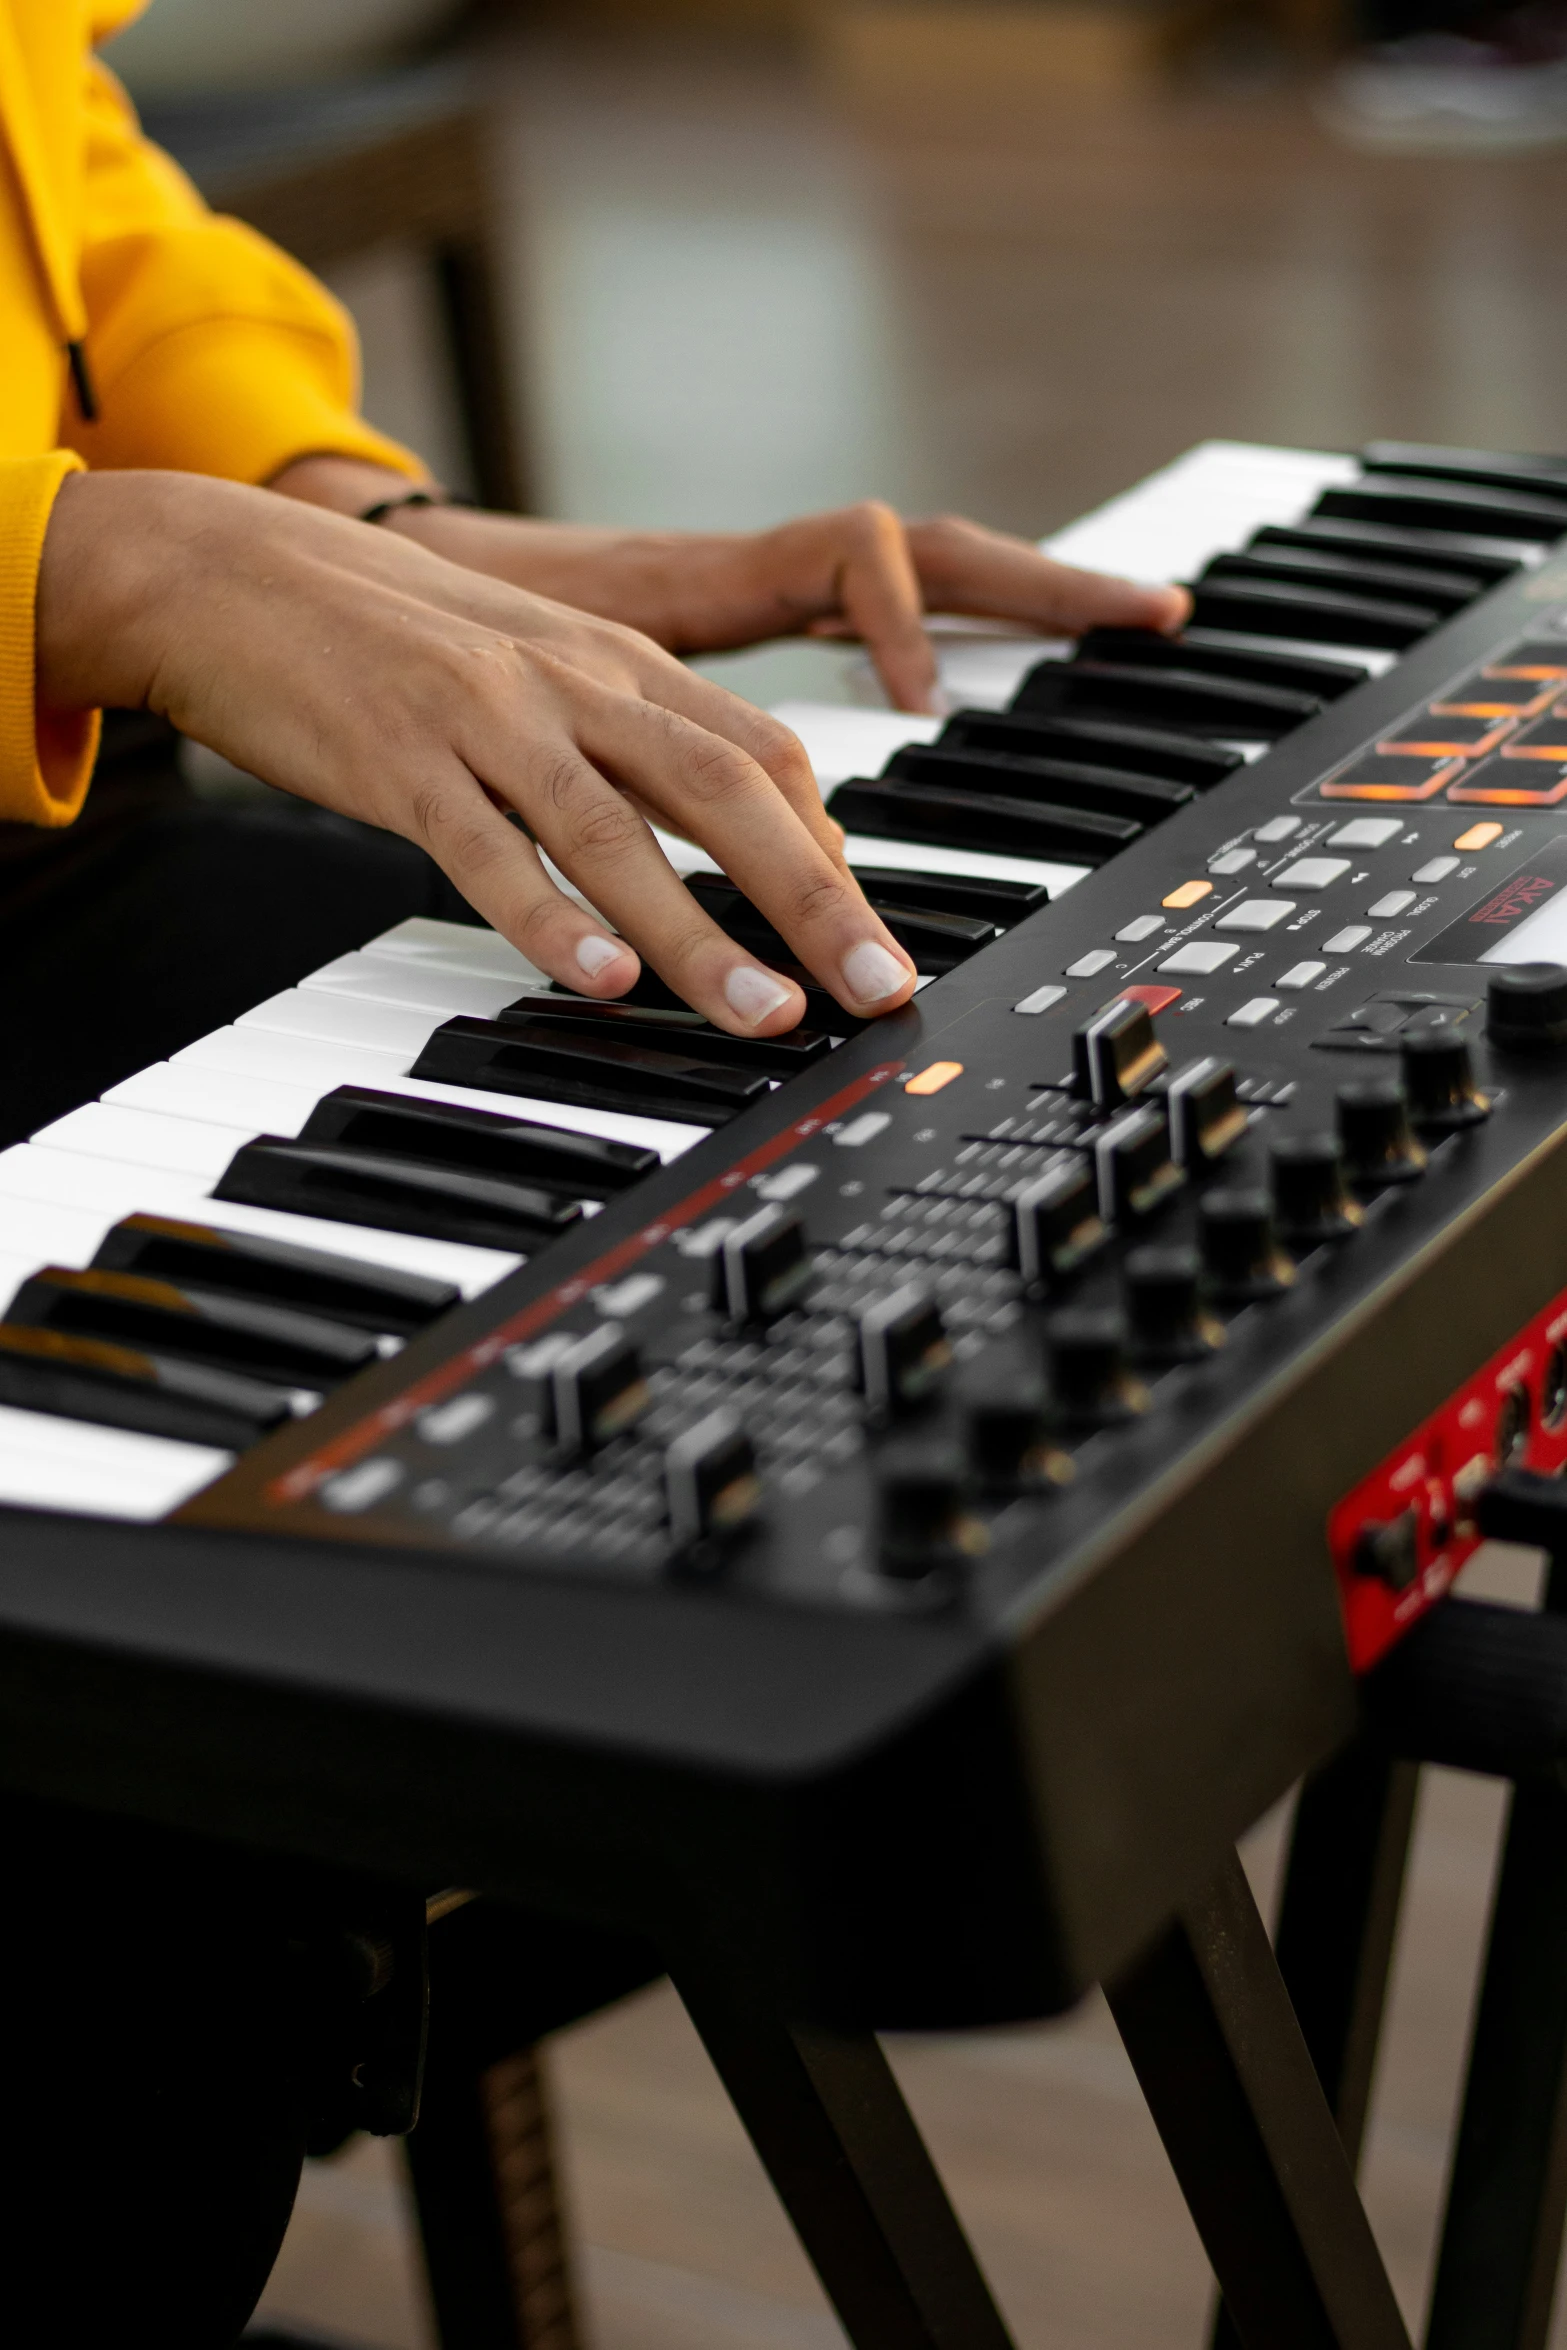 the hand of a person plays the electronic piano